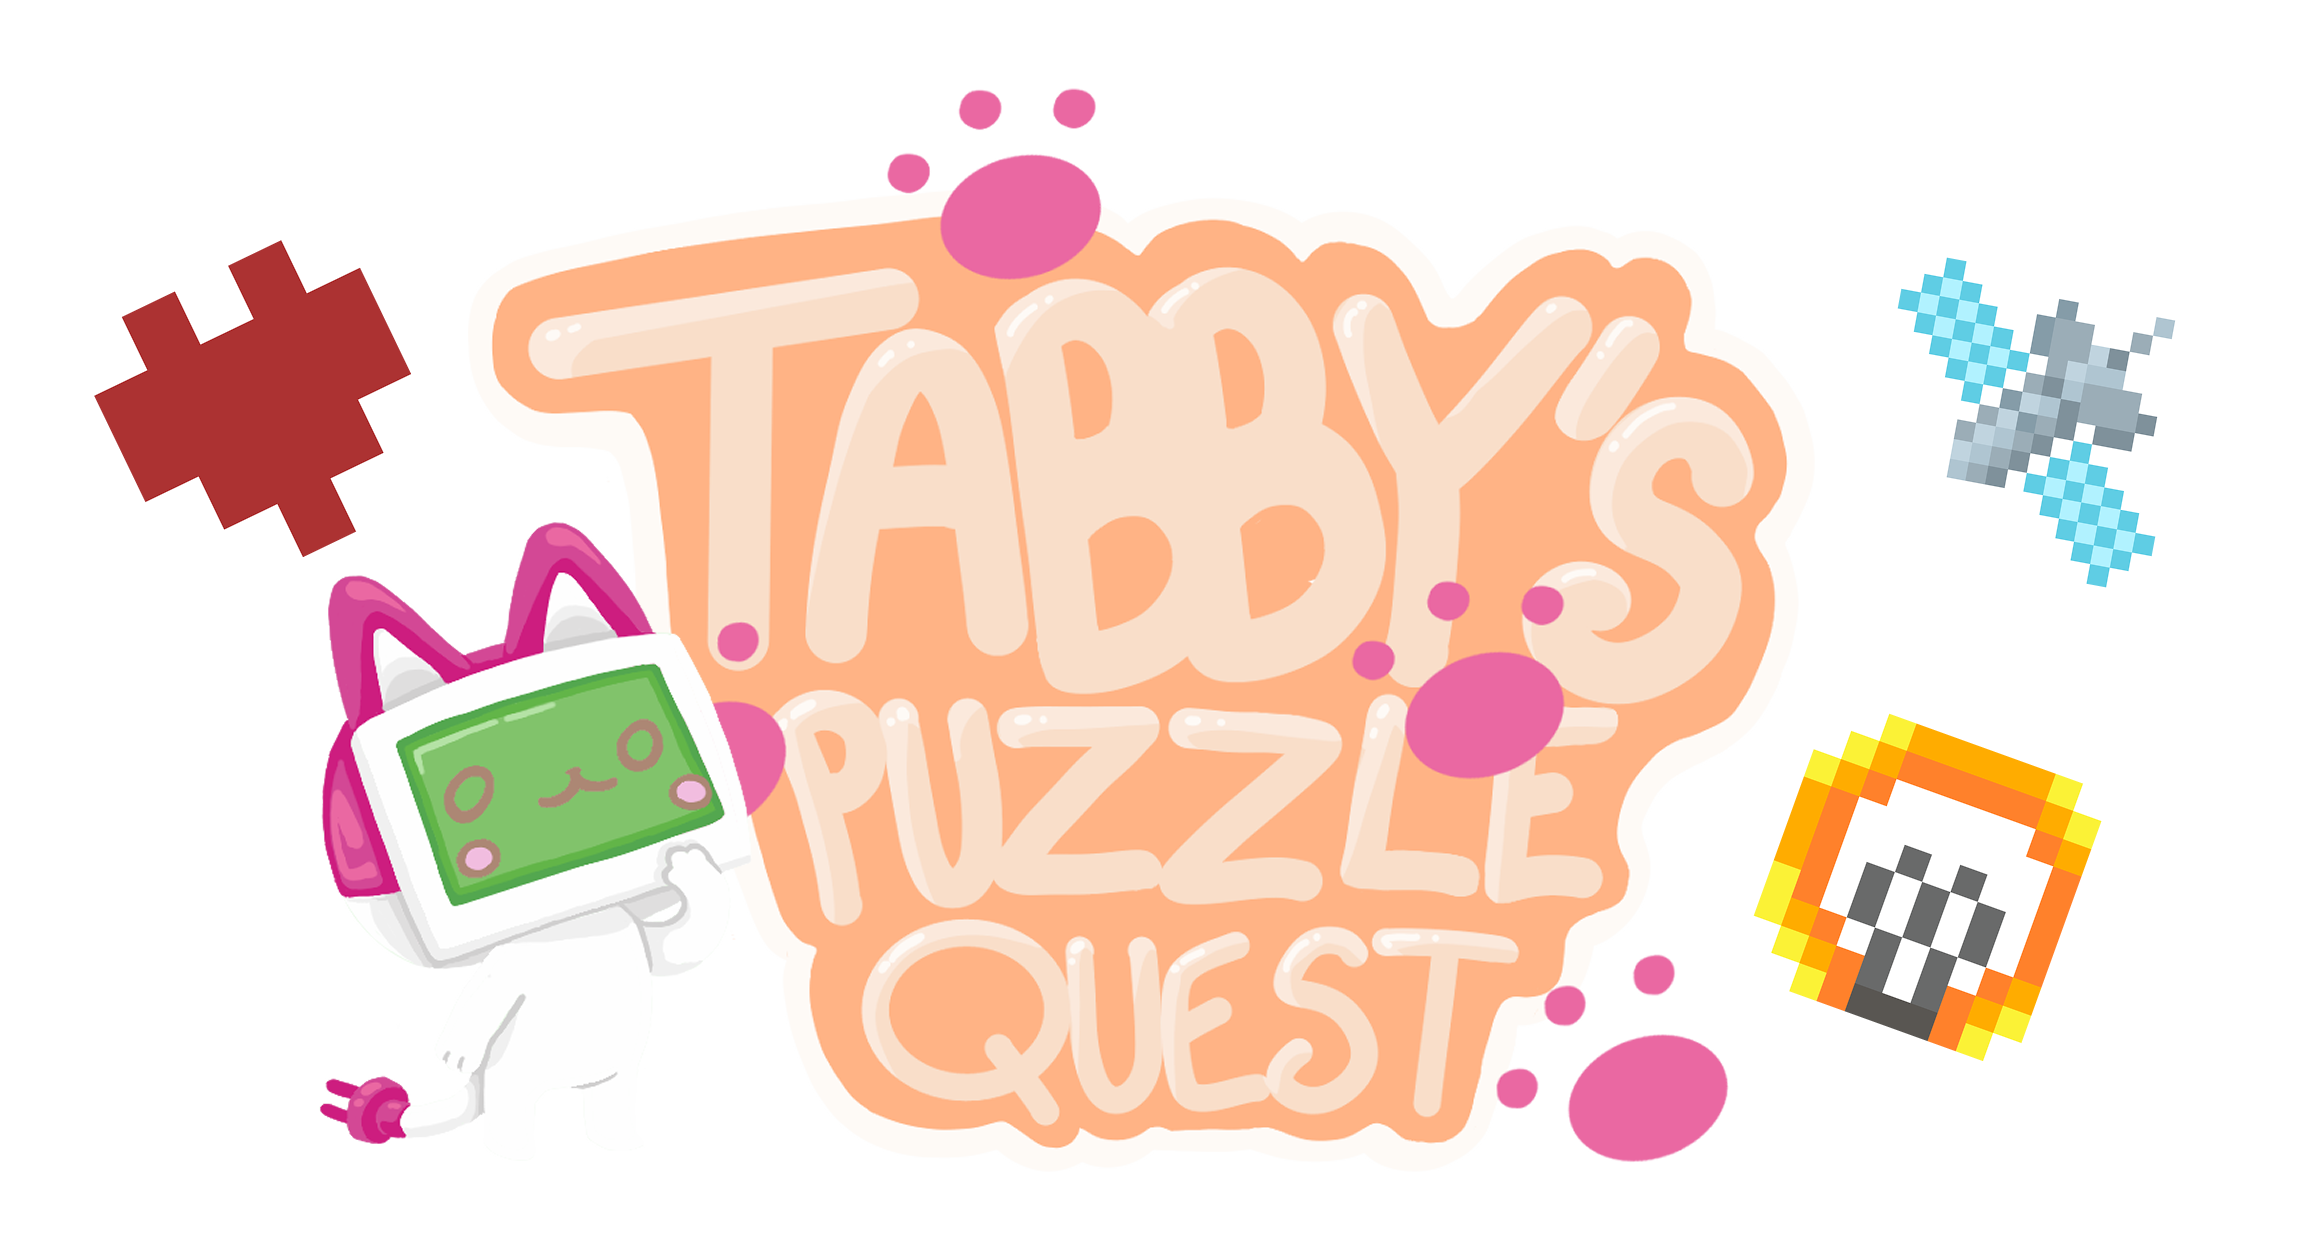 Tabby's Puzzle Quest logo